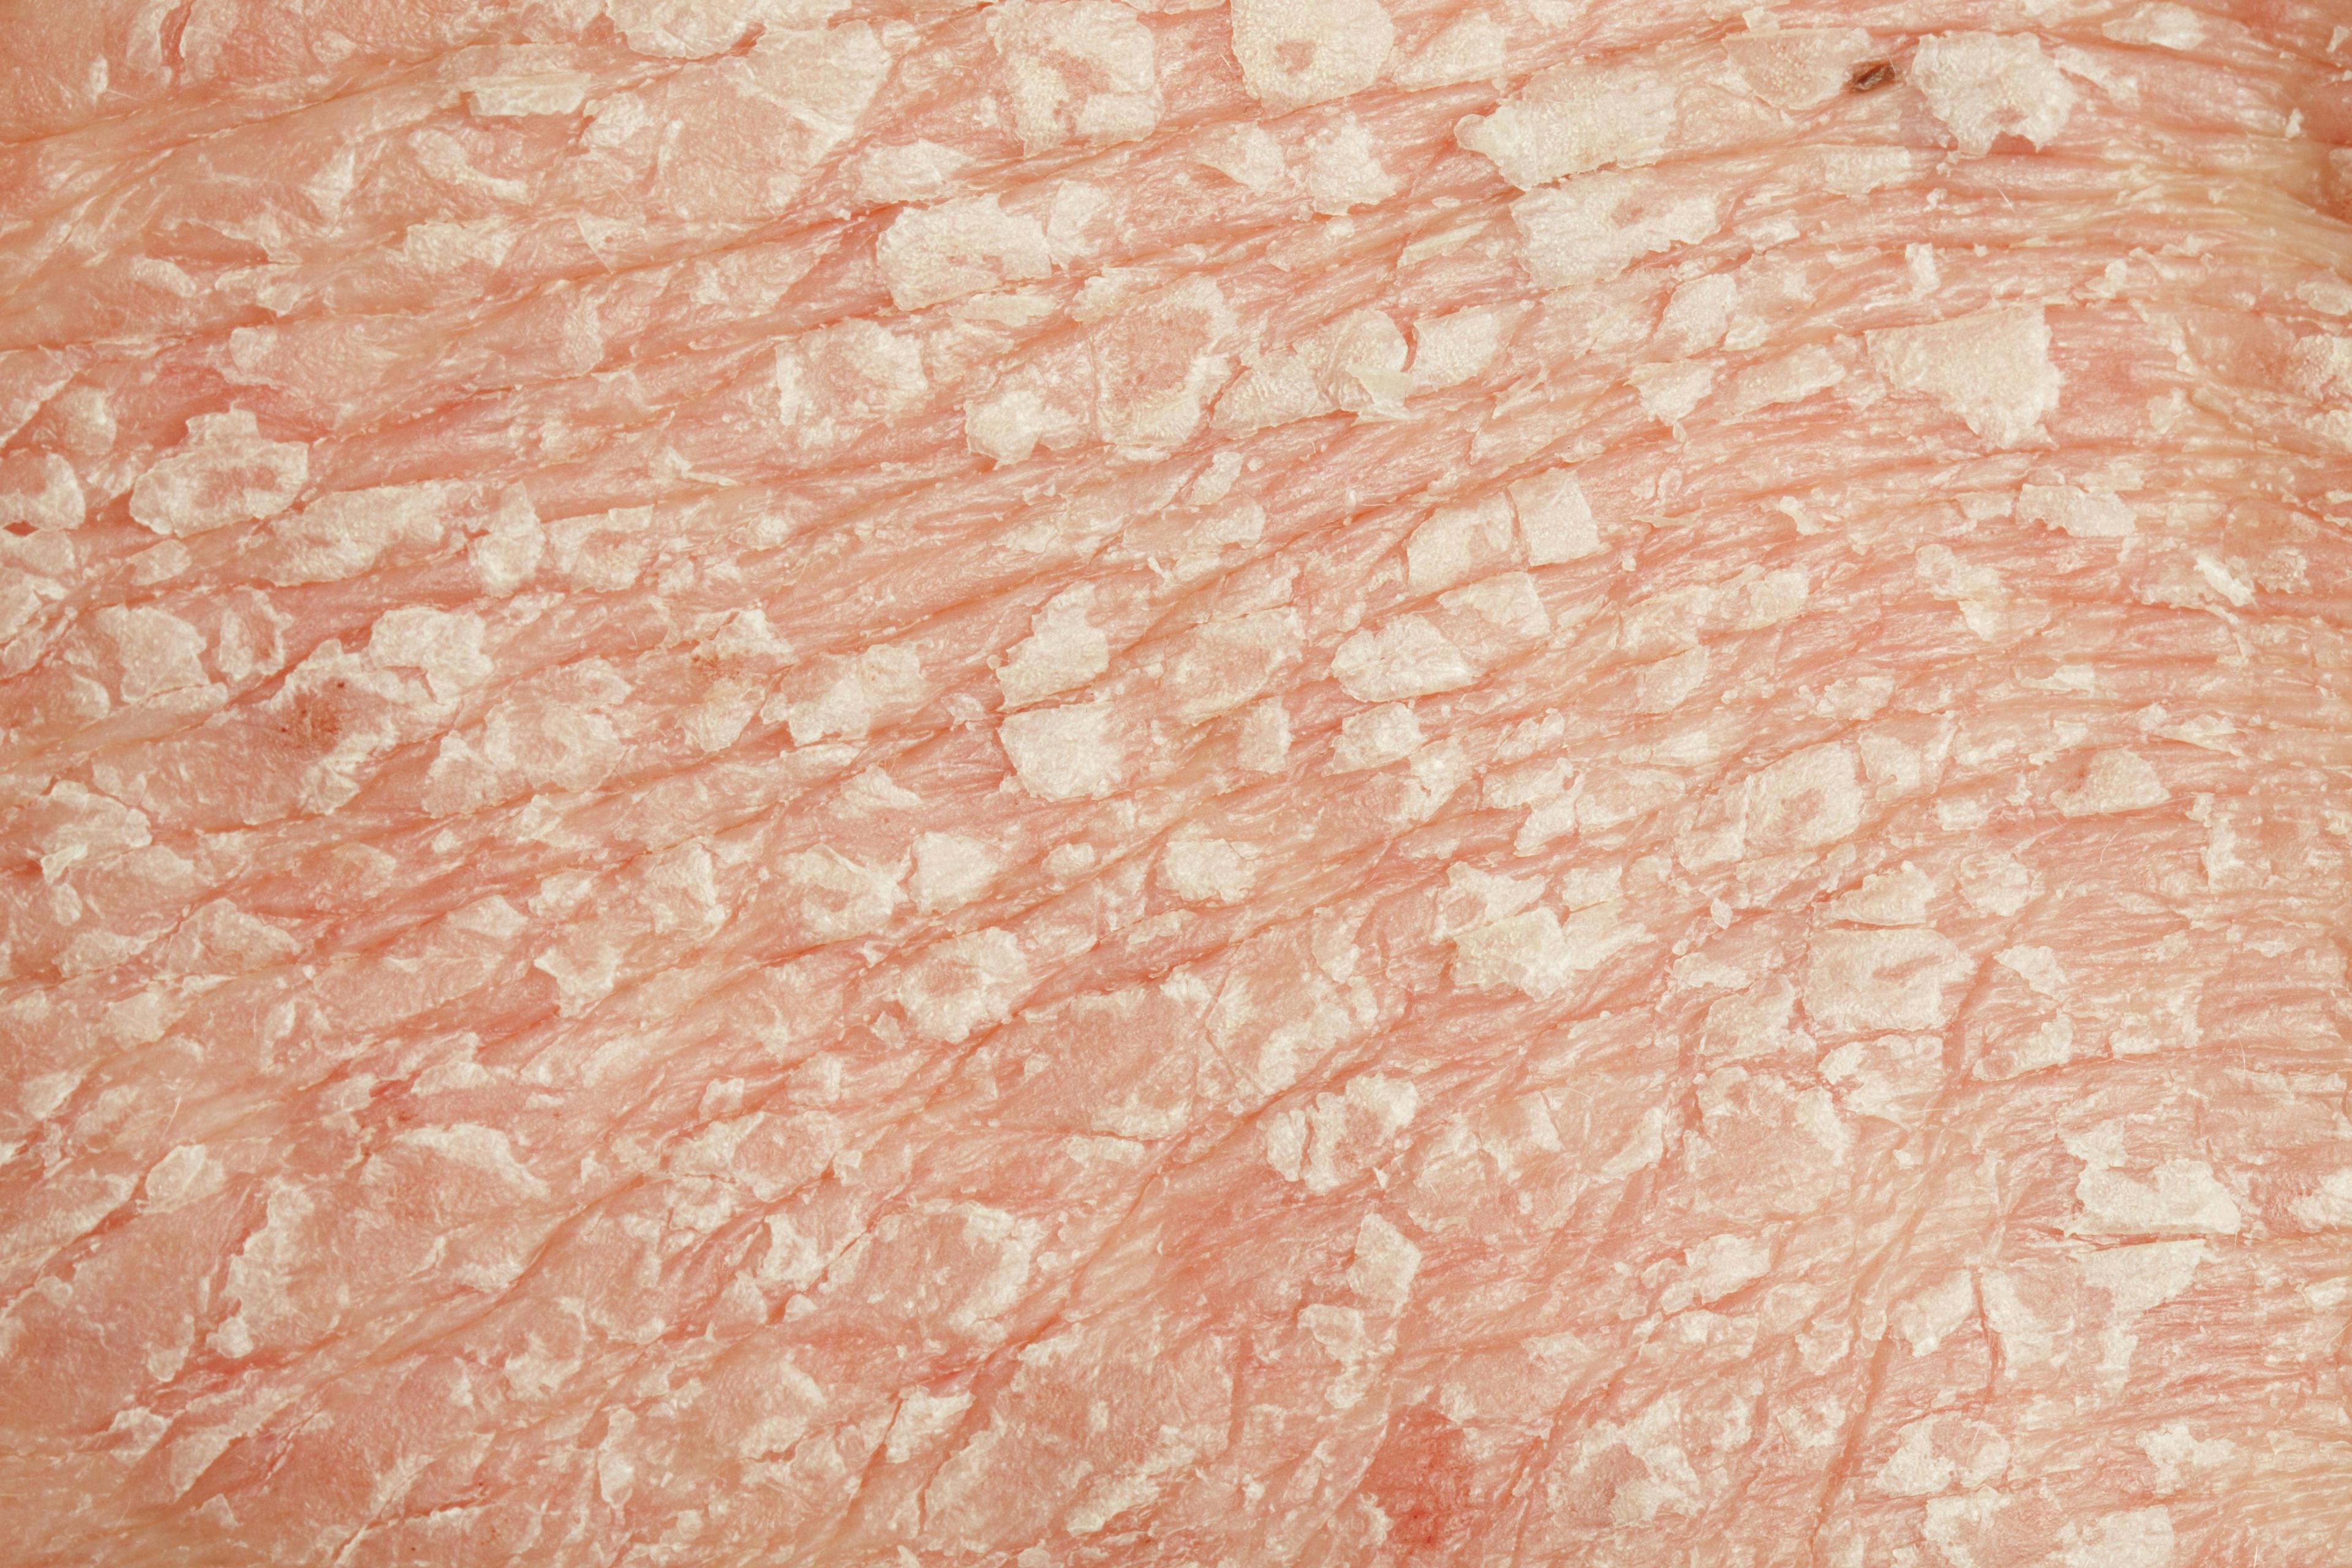 Skin affected by psoriasis